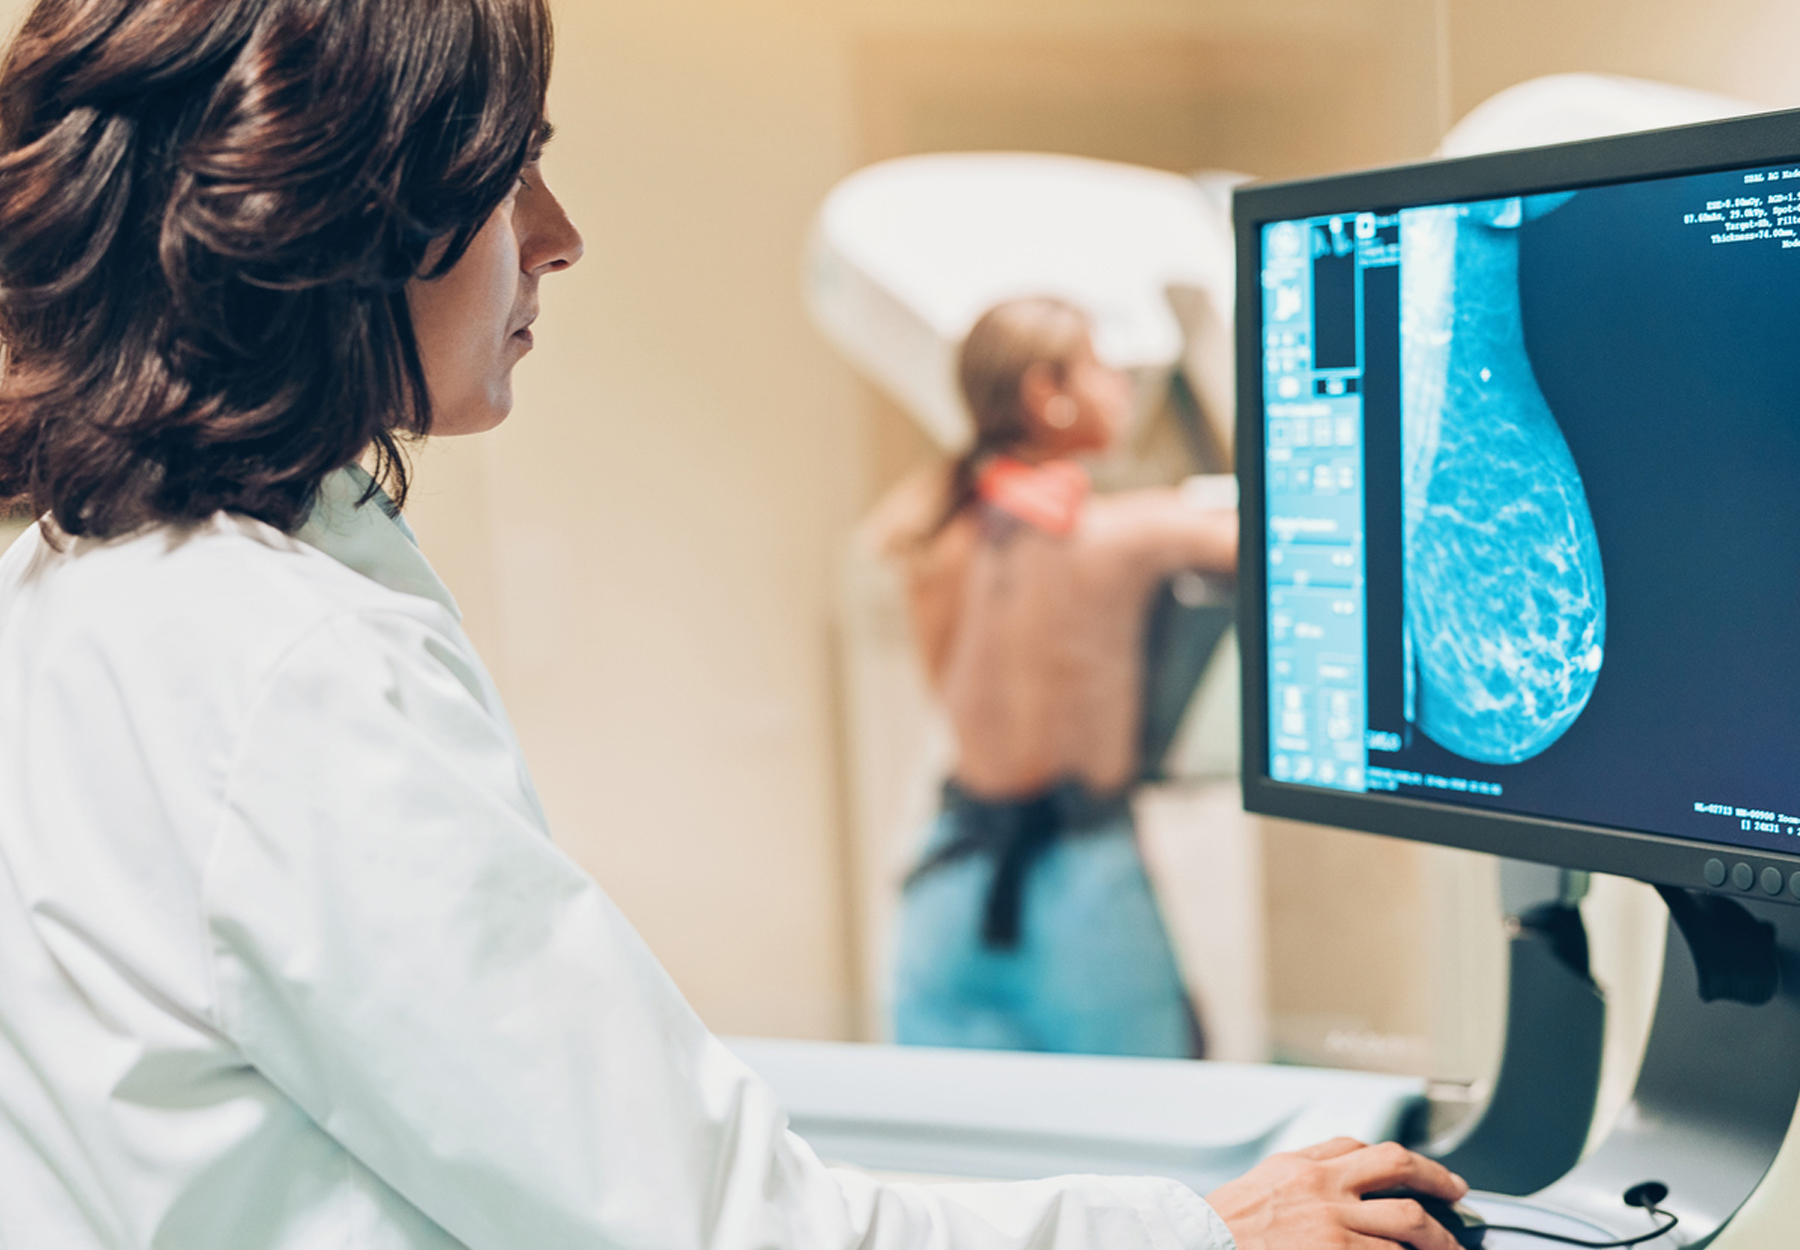 A medical technician looks at a computer screen while a patient stands in a mammogram machine in the background